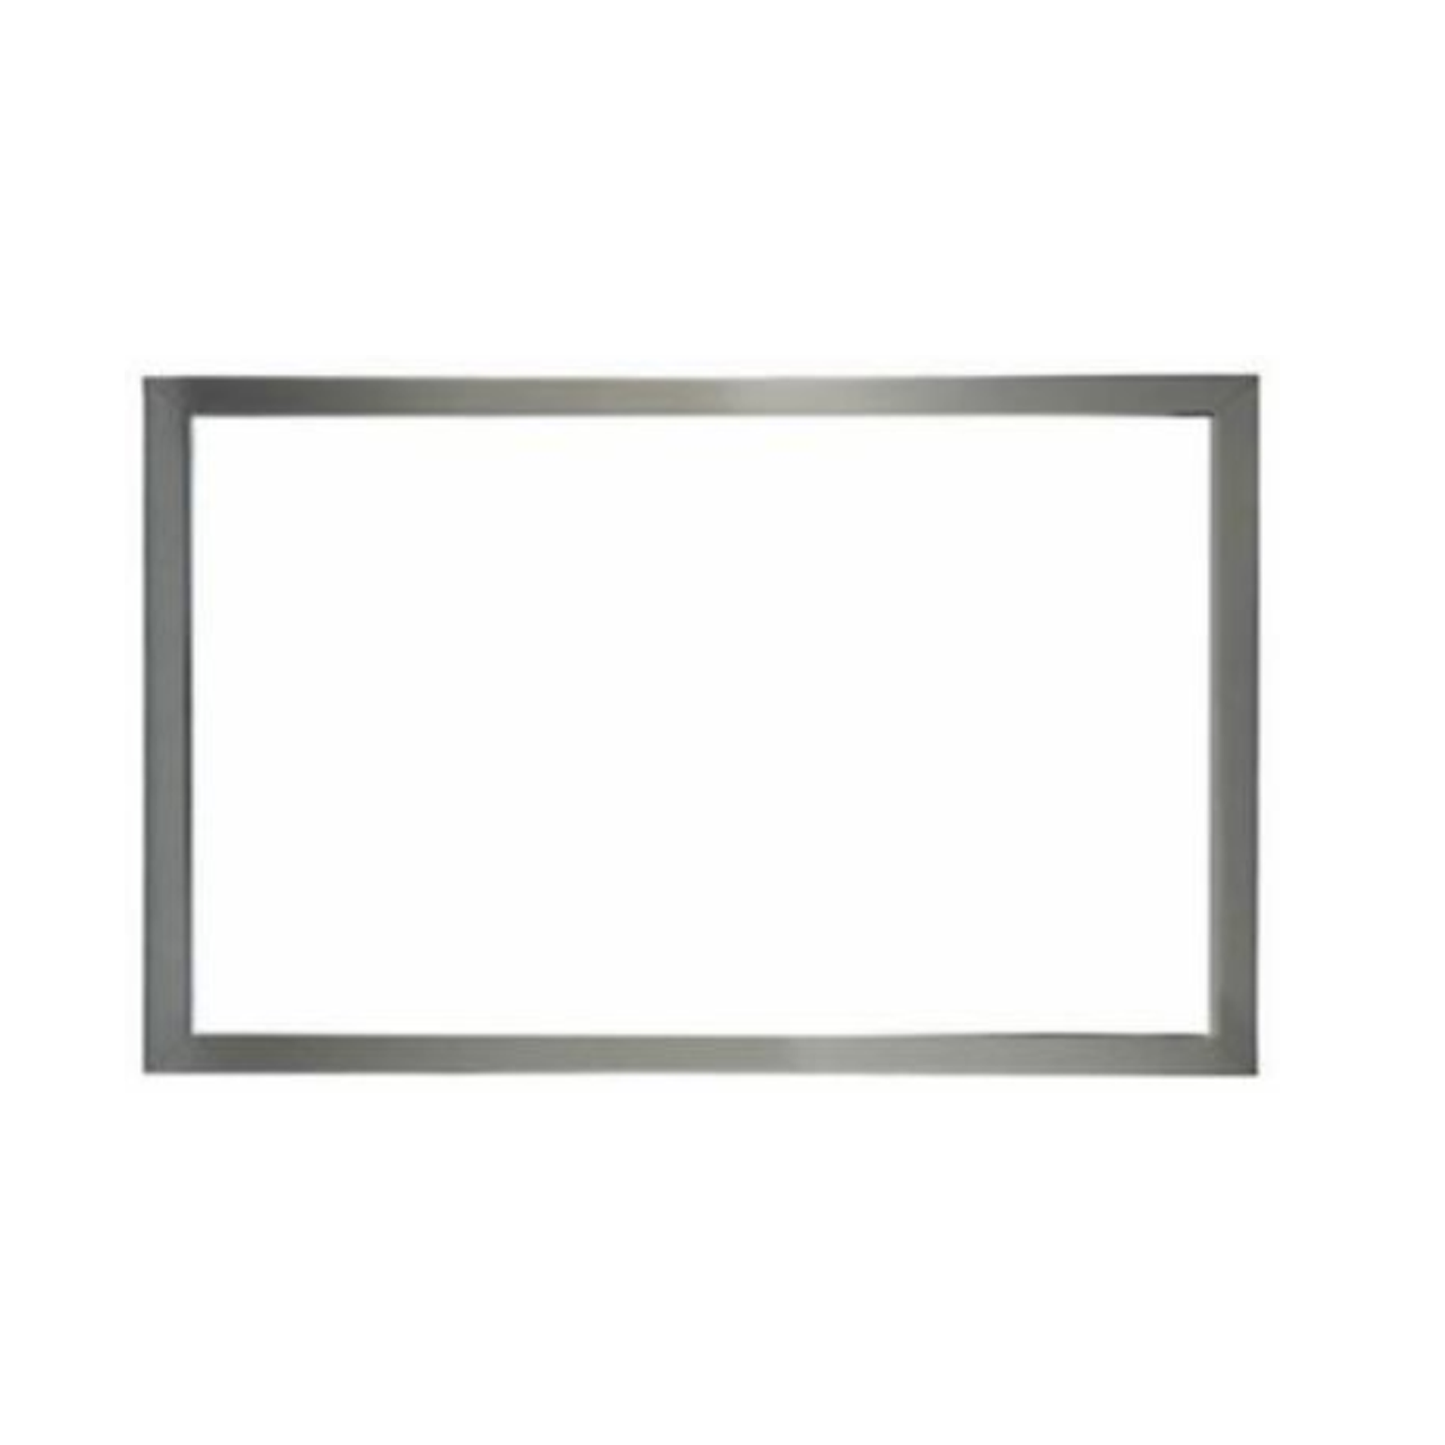 Empire 1.5-in. Oil-Rubbed Bronze Beveled Frame - DF362BZT